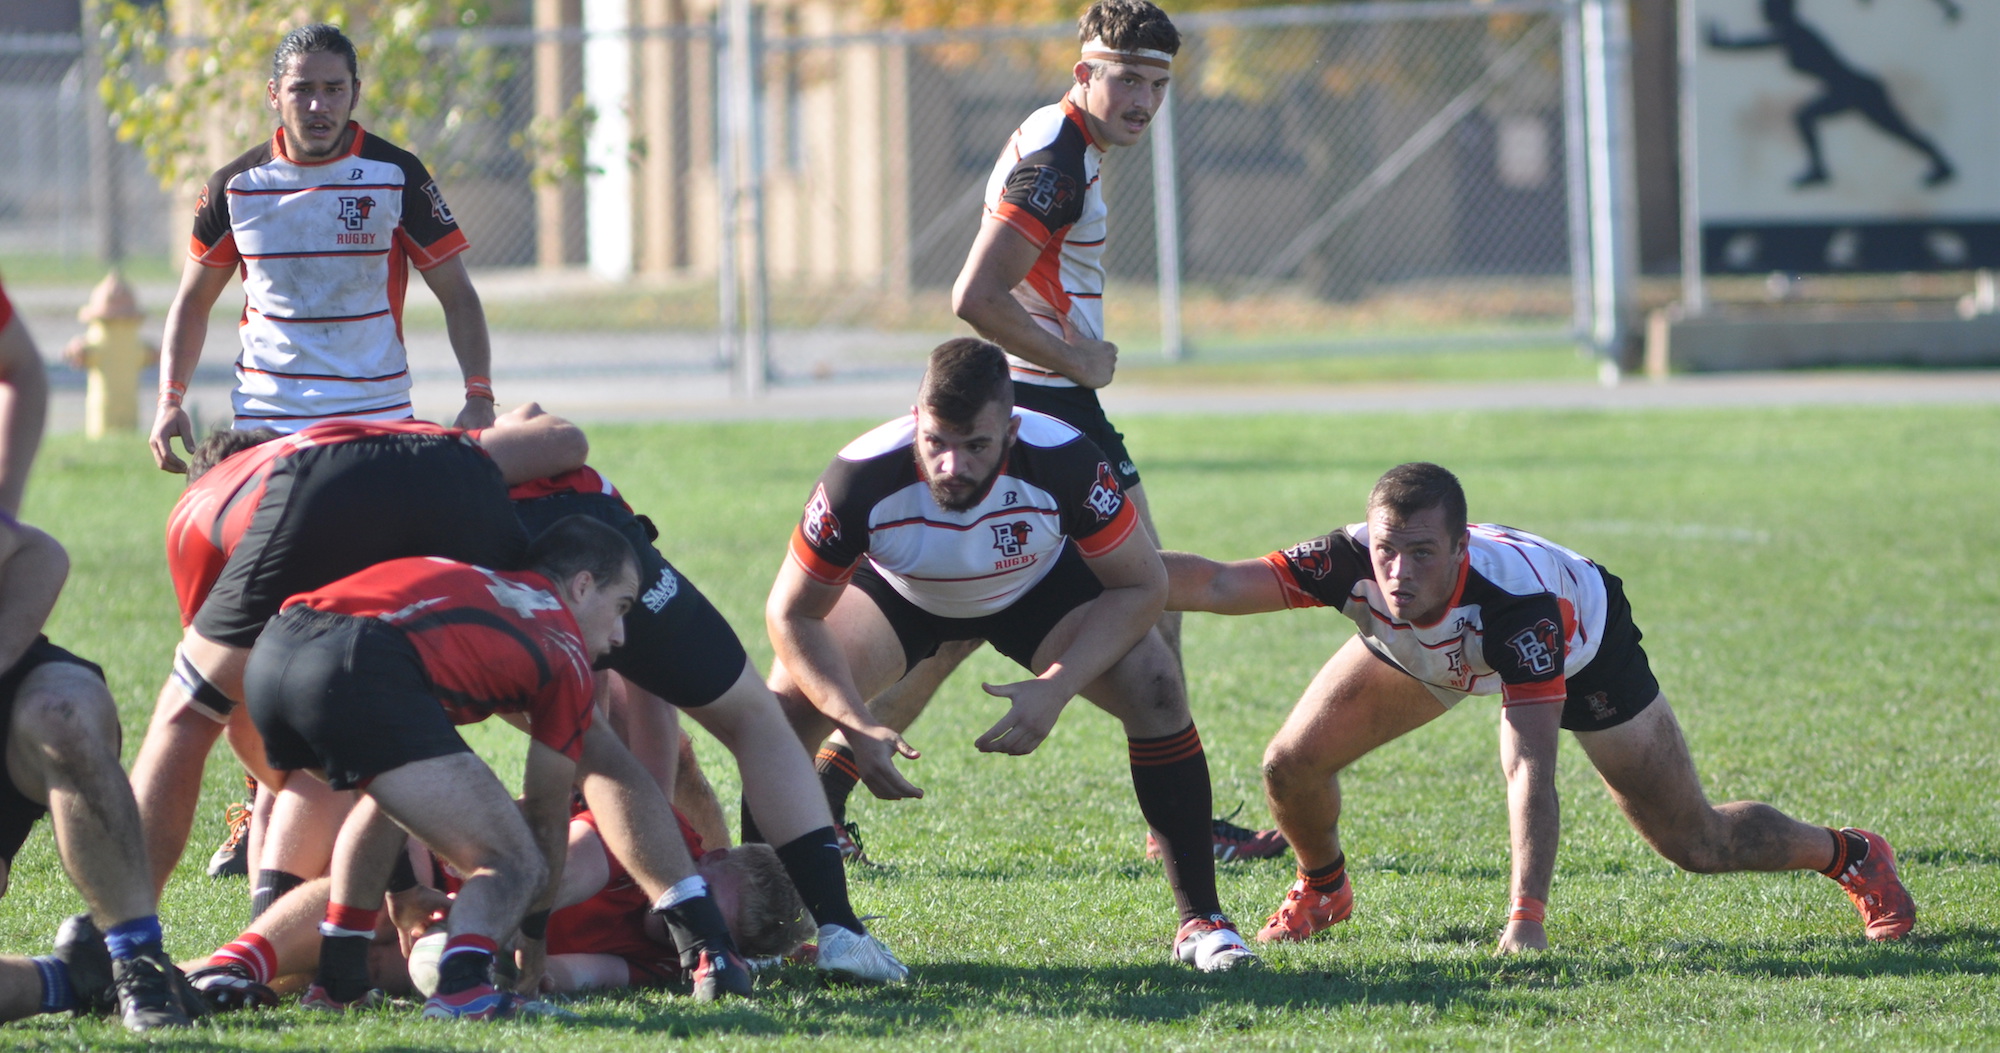 Bowling Green sets the defensive line v Cincinnati in the MAC Rugby Conference final November 6, 2016.